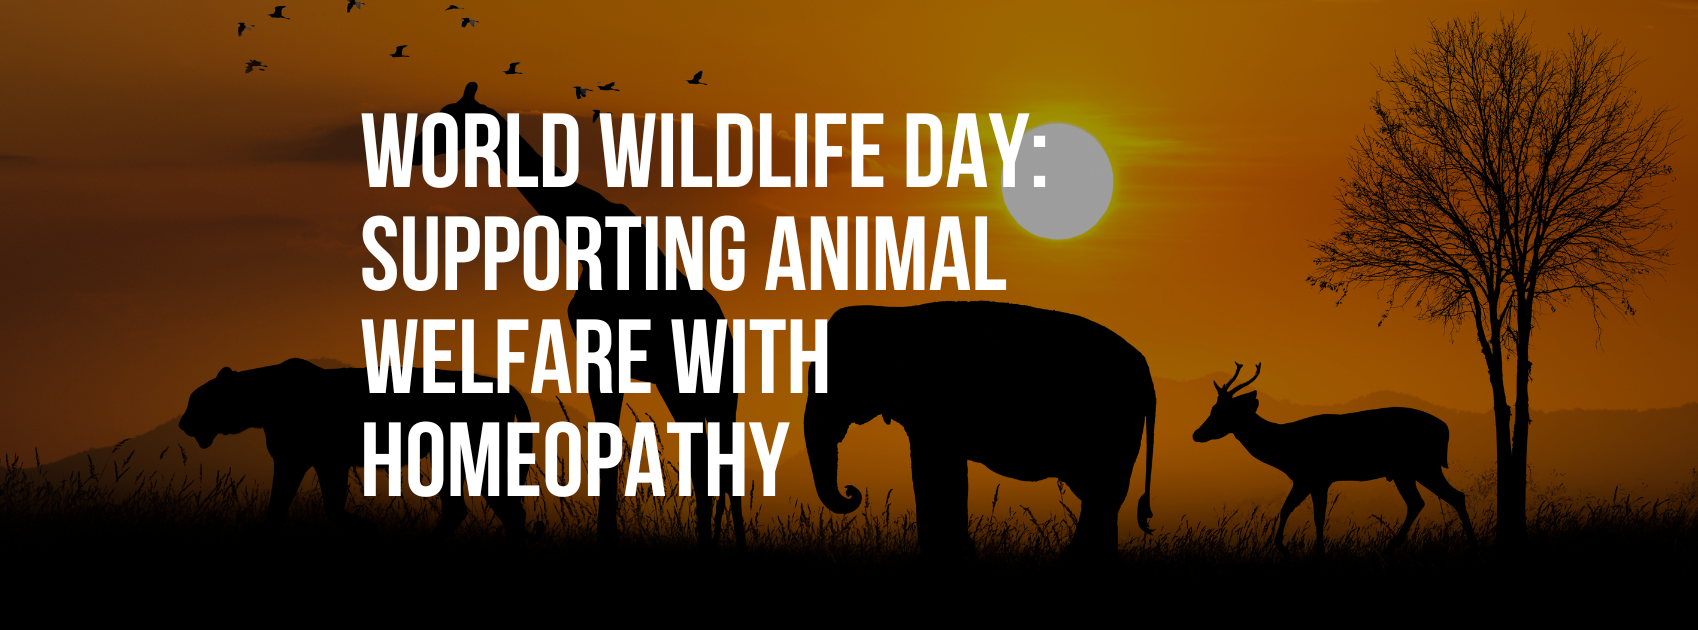 World Wildlife Day: Supporting Animal Welfare with Homeopathy